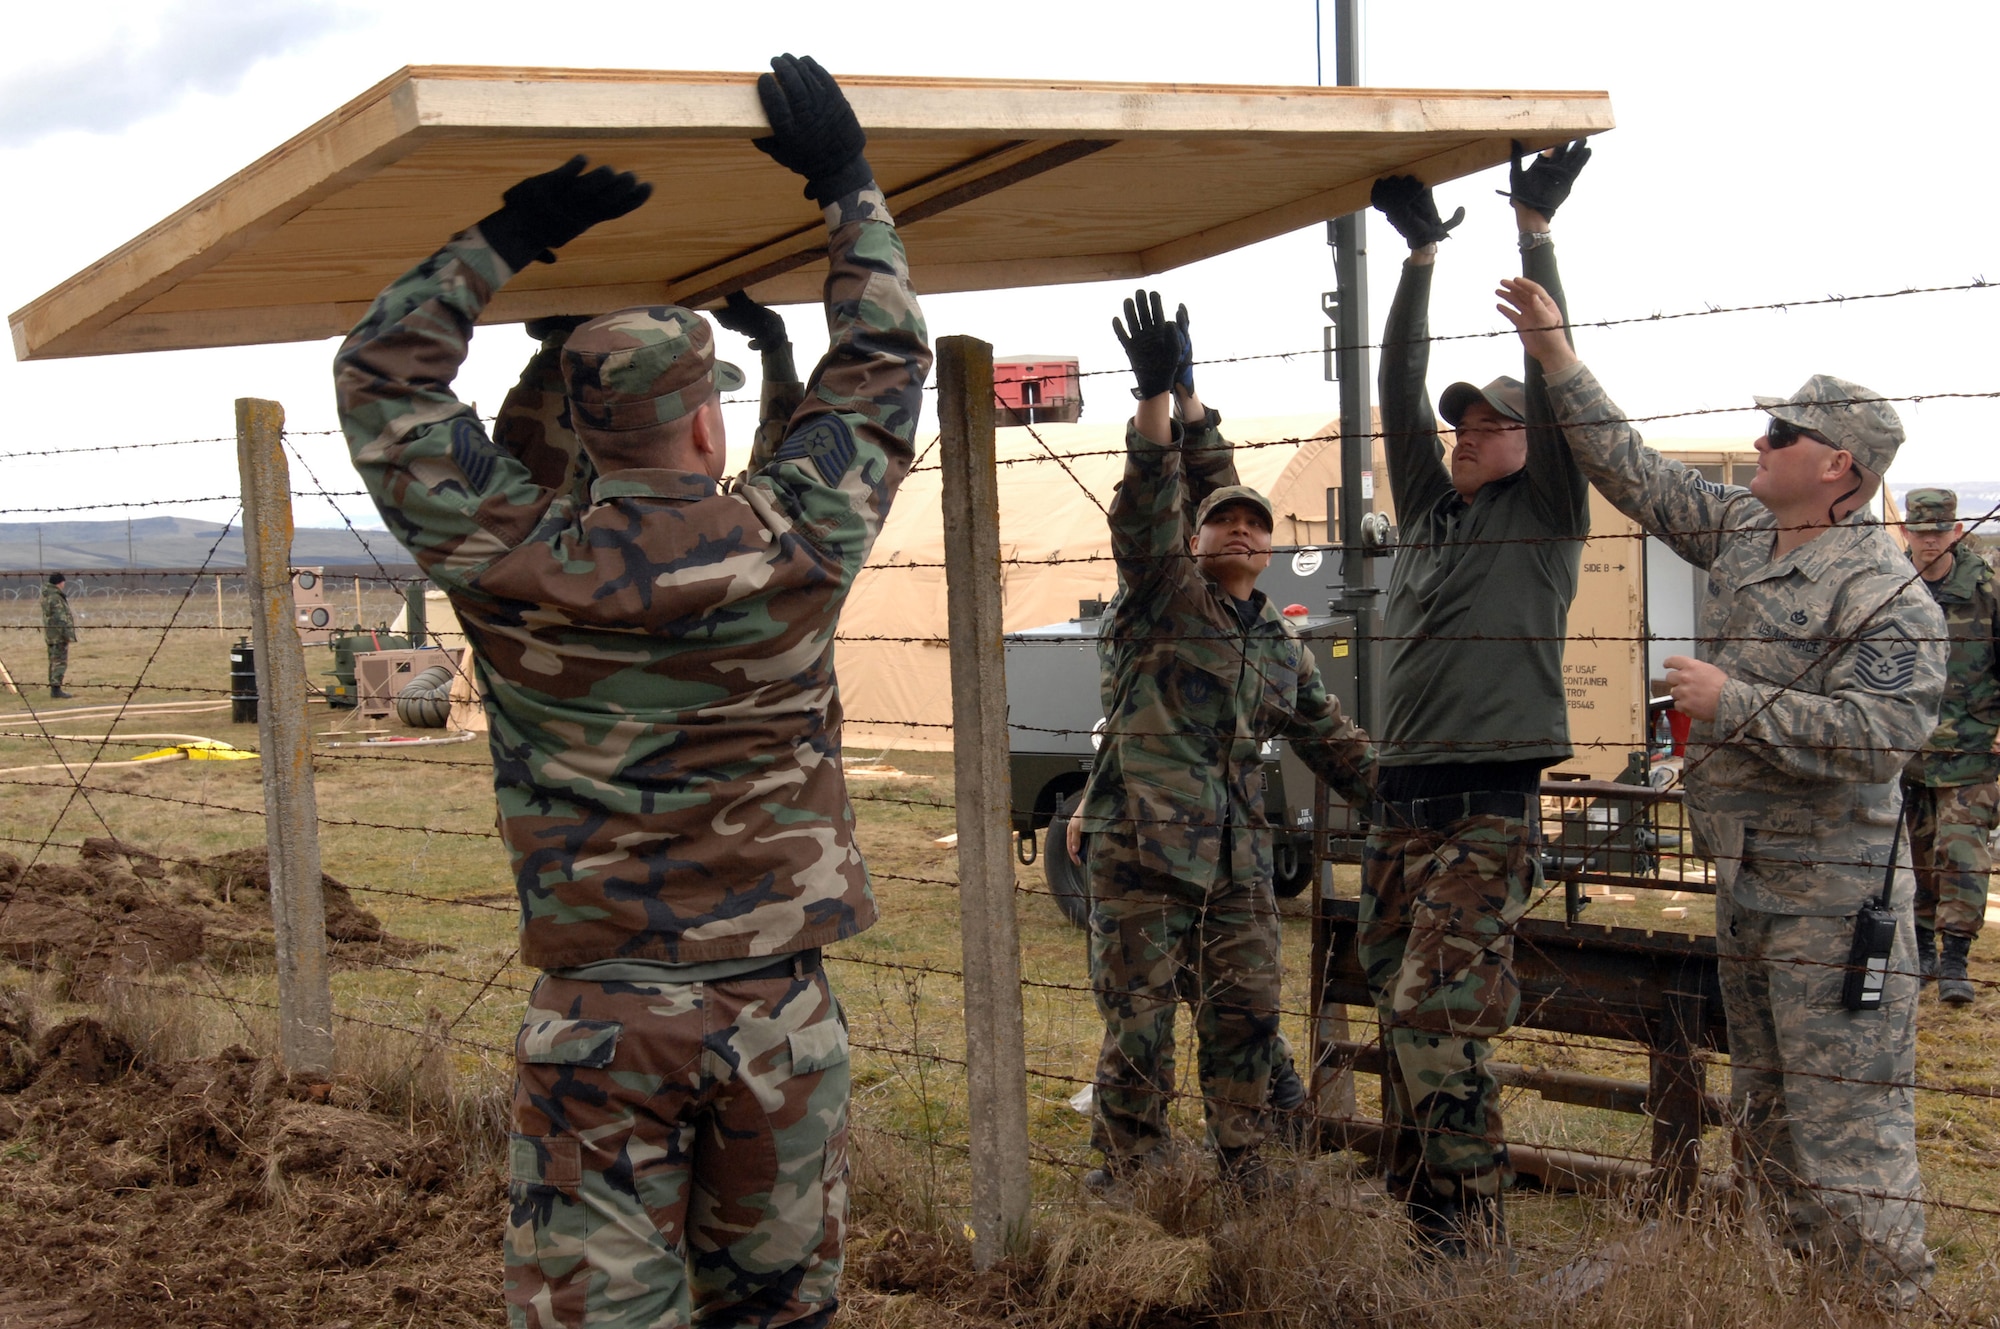 CAMPIA TURZII, Romania -- Members of the 404th Expeditionary Air Base Squadron pass a section of plywood flooring over a fence here at the tent city March 24, 2008.  The deployed civil engineering team built an entire tent city here in 96 hours to support U.S. operations at the air base.  The Airmen are part of a team which is augmenting NATO forces in securing the airspace around Bucharest, Romania, for the NATO Summit April 2-4,  (U.S Air Force photo by Senior Airman Teresa M. Hawkins)
